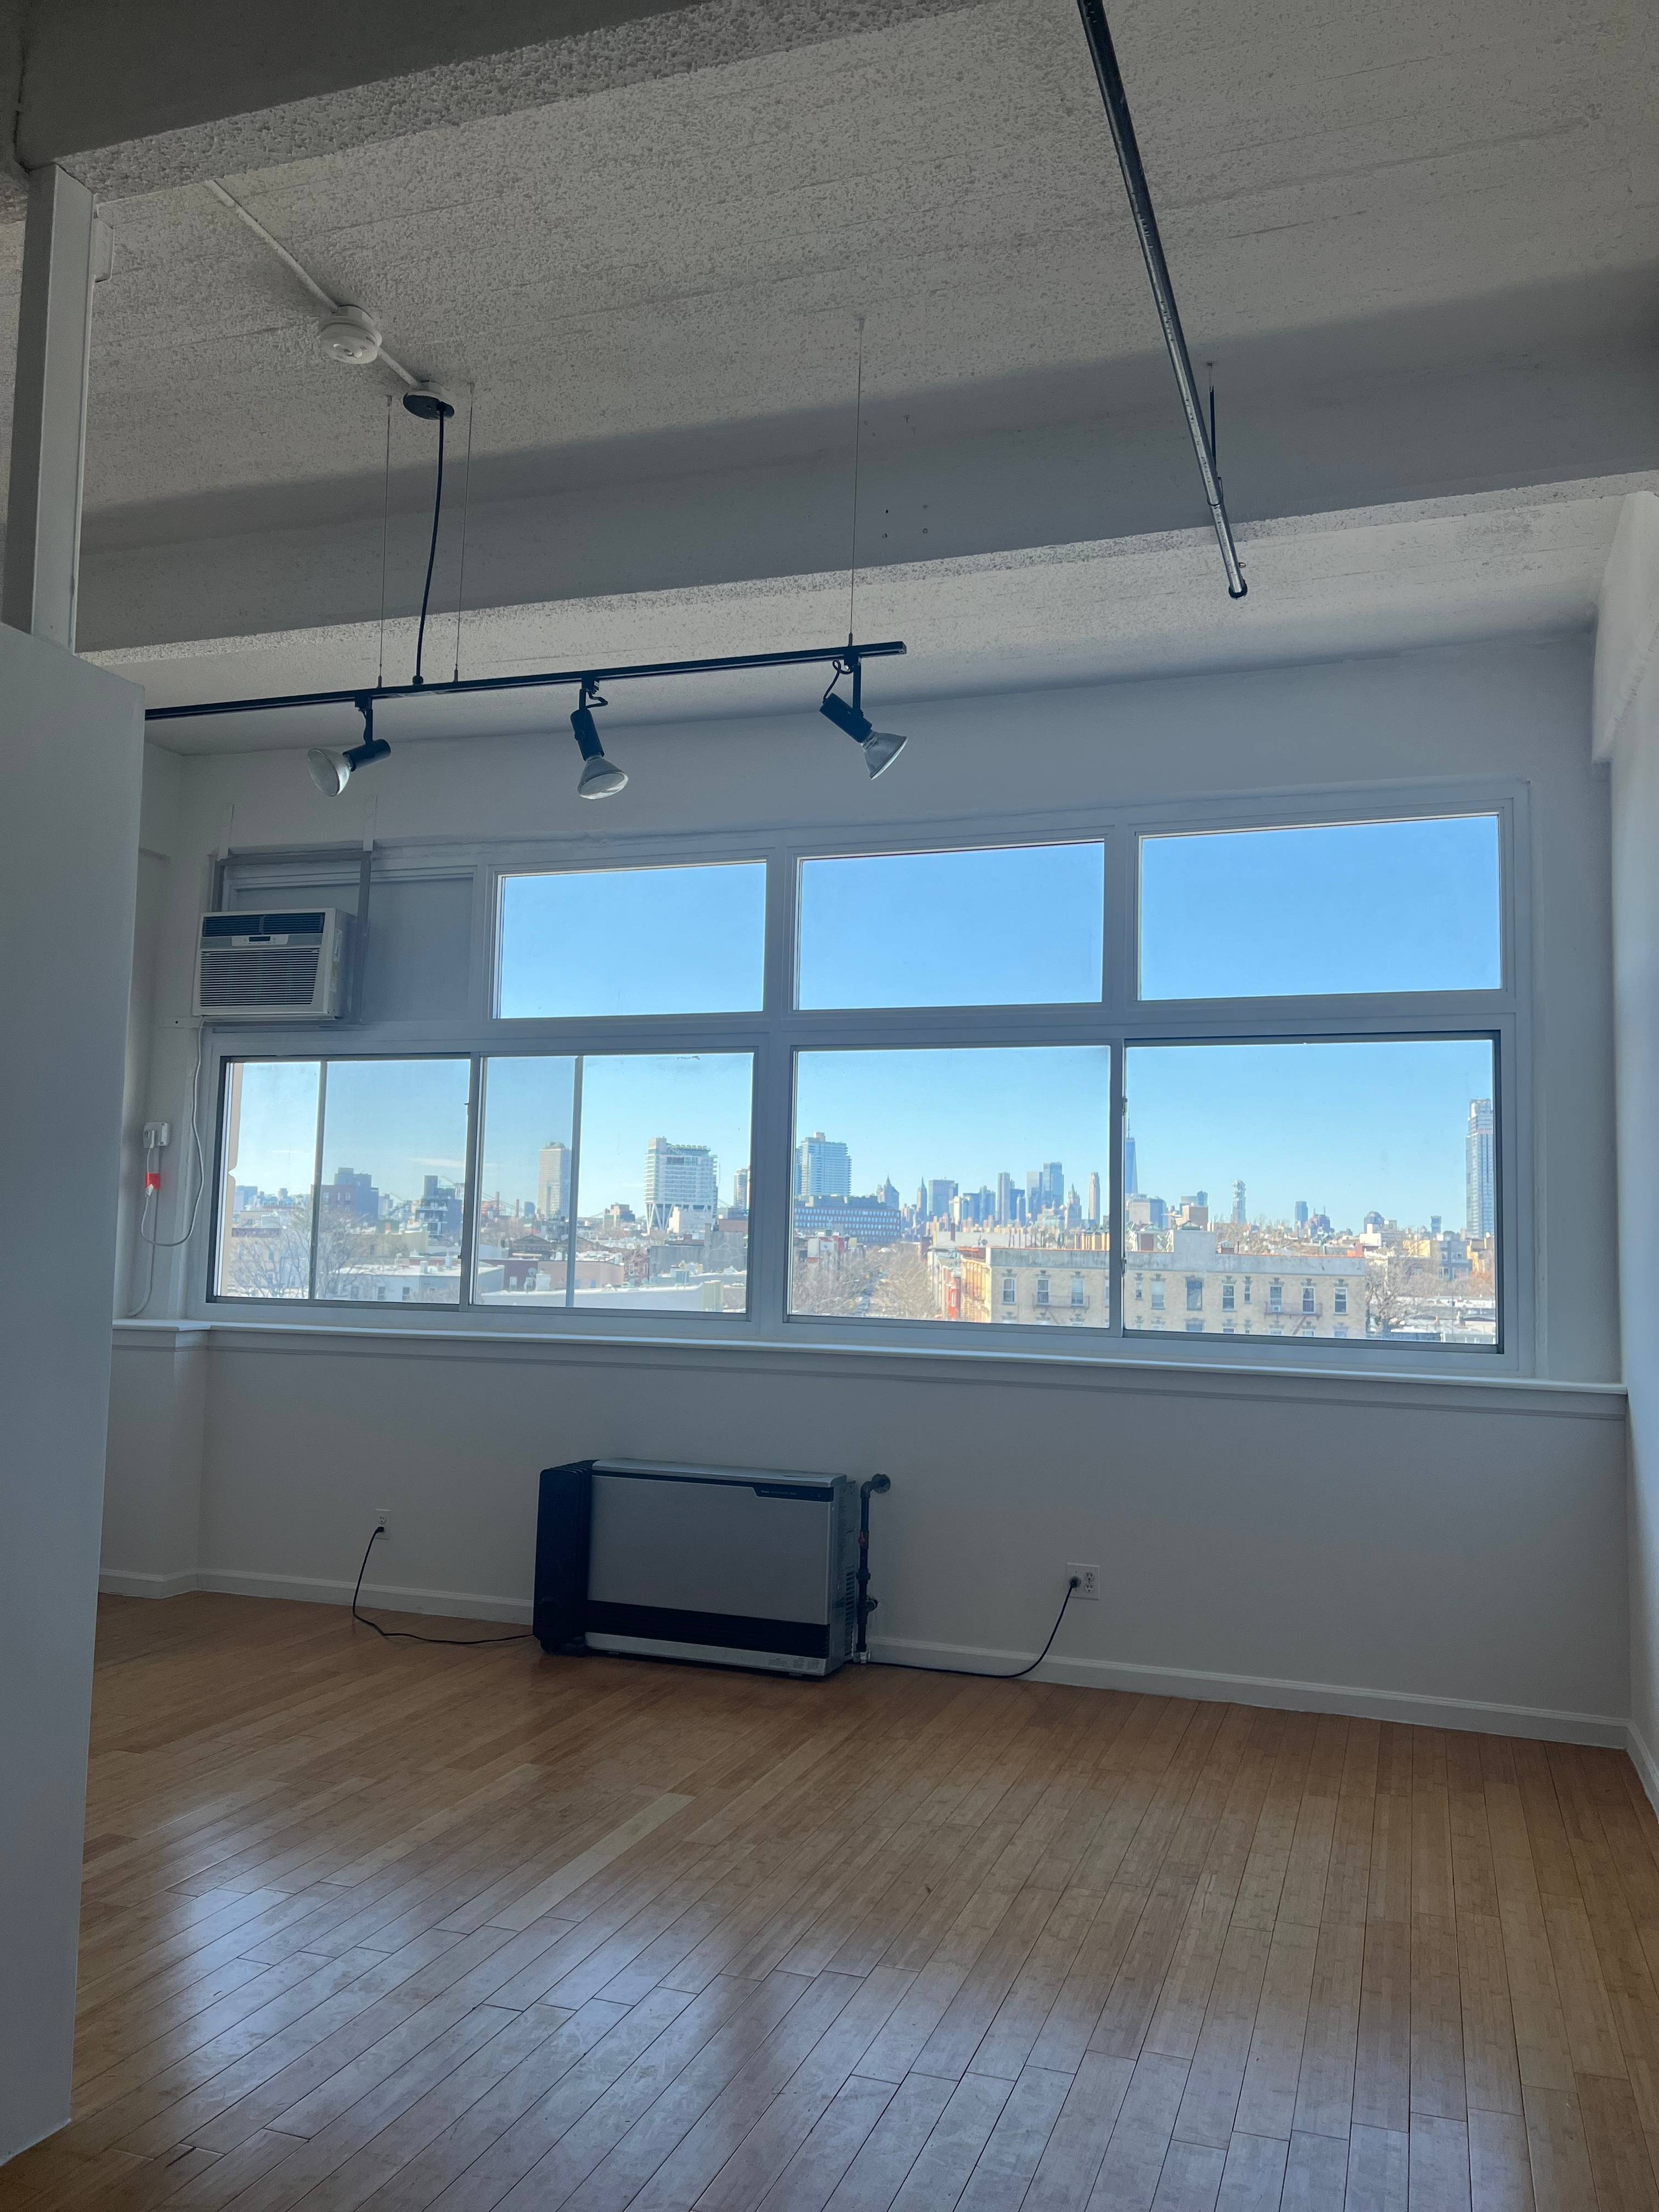 One of A Kind Commercial Condo Loft for SALE in Greenpoint, Brooklyn.